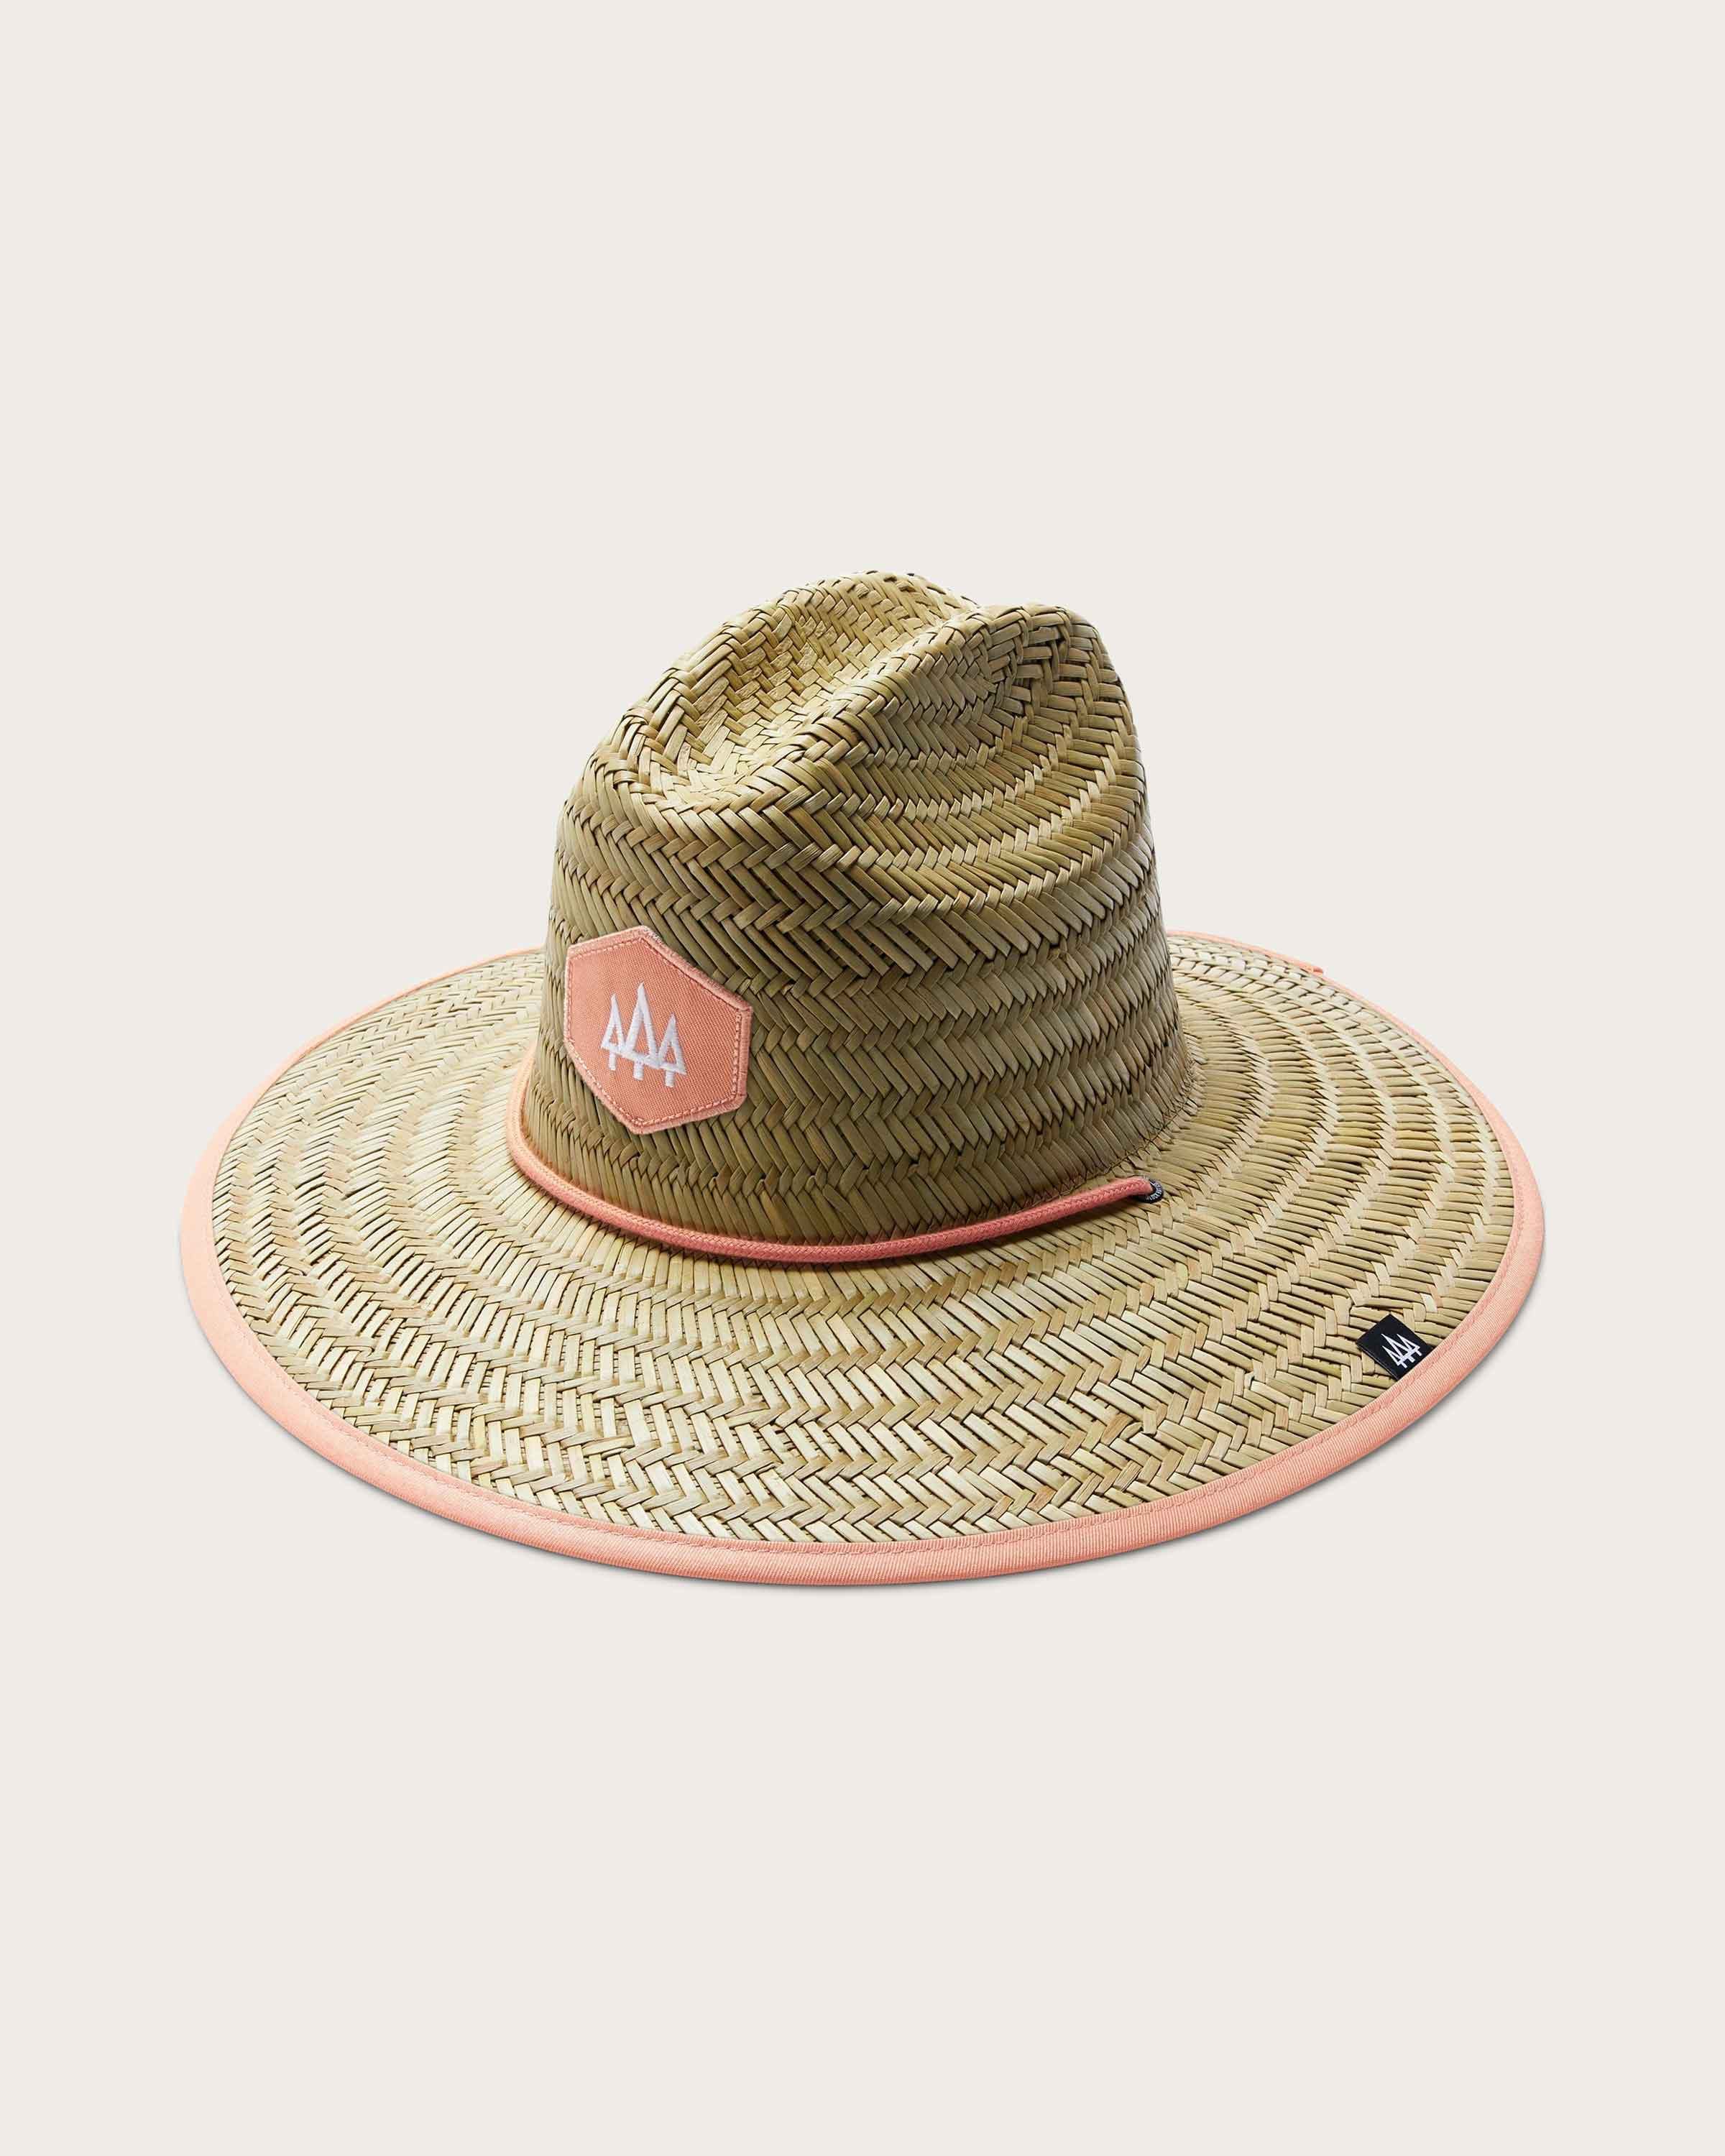 Guava - undefined - Hemlock Hat Co. Lifeguards - Adults